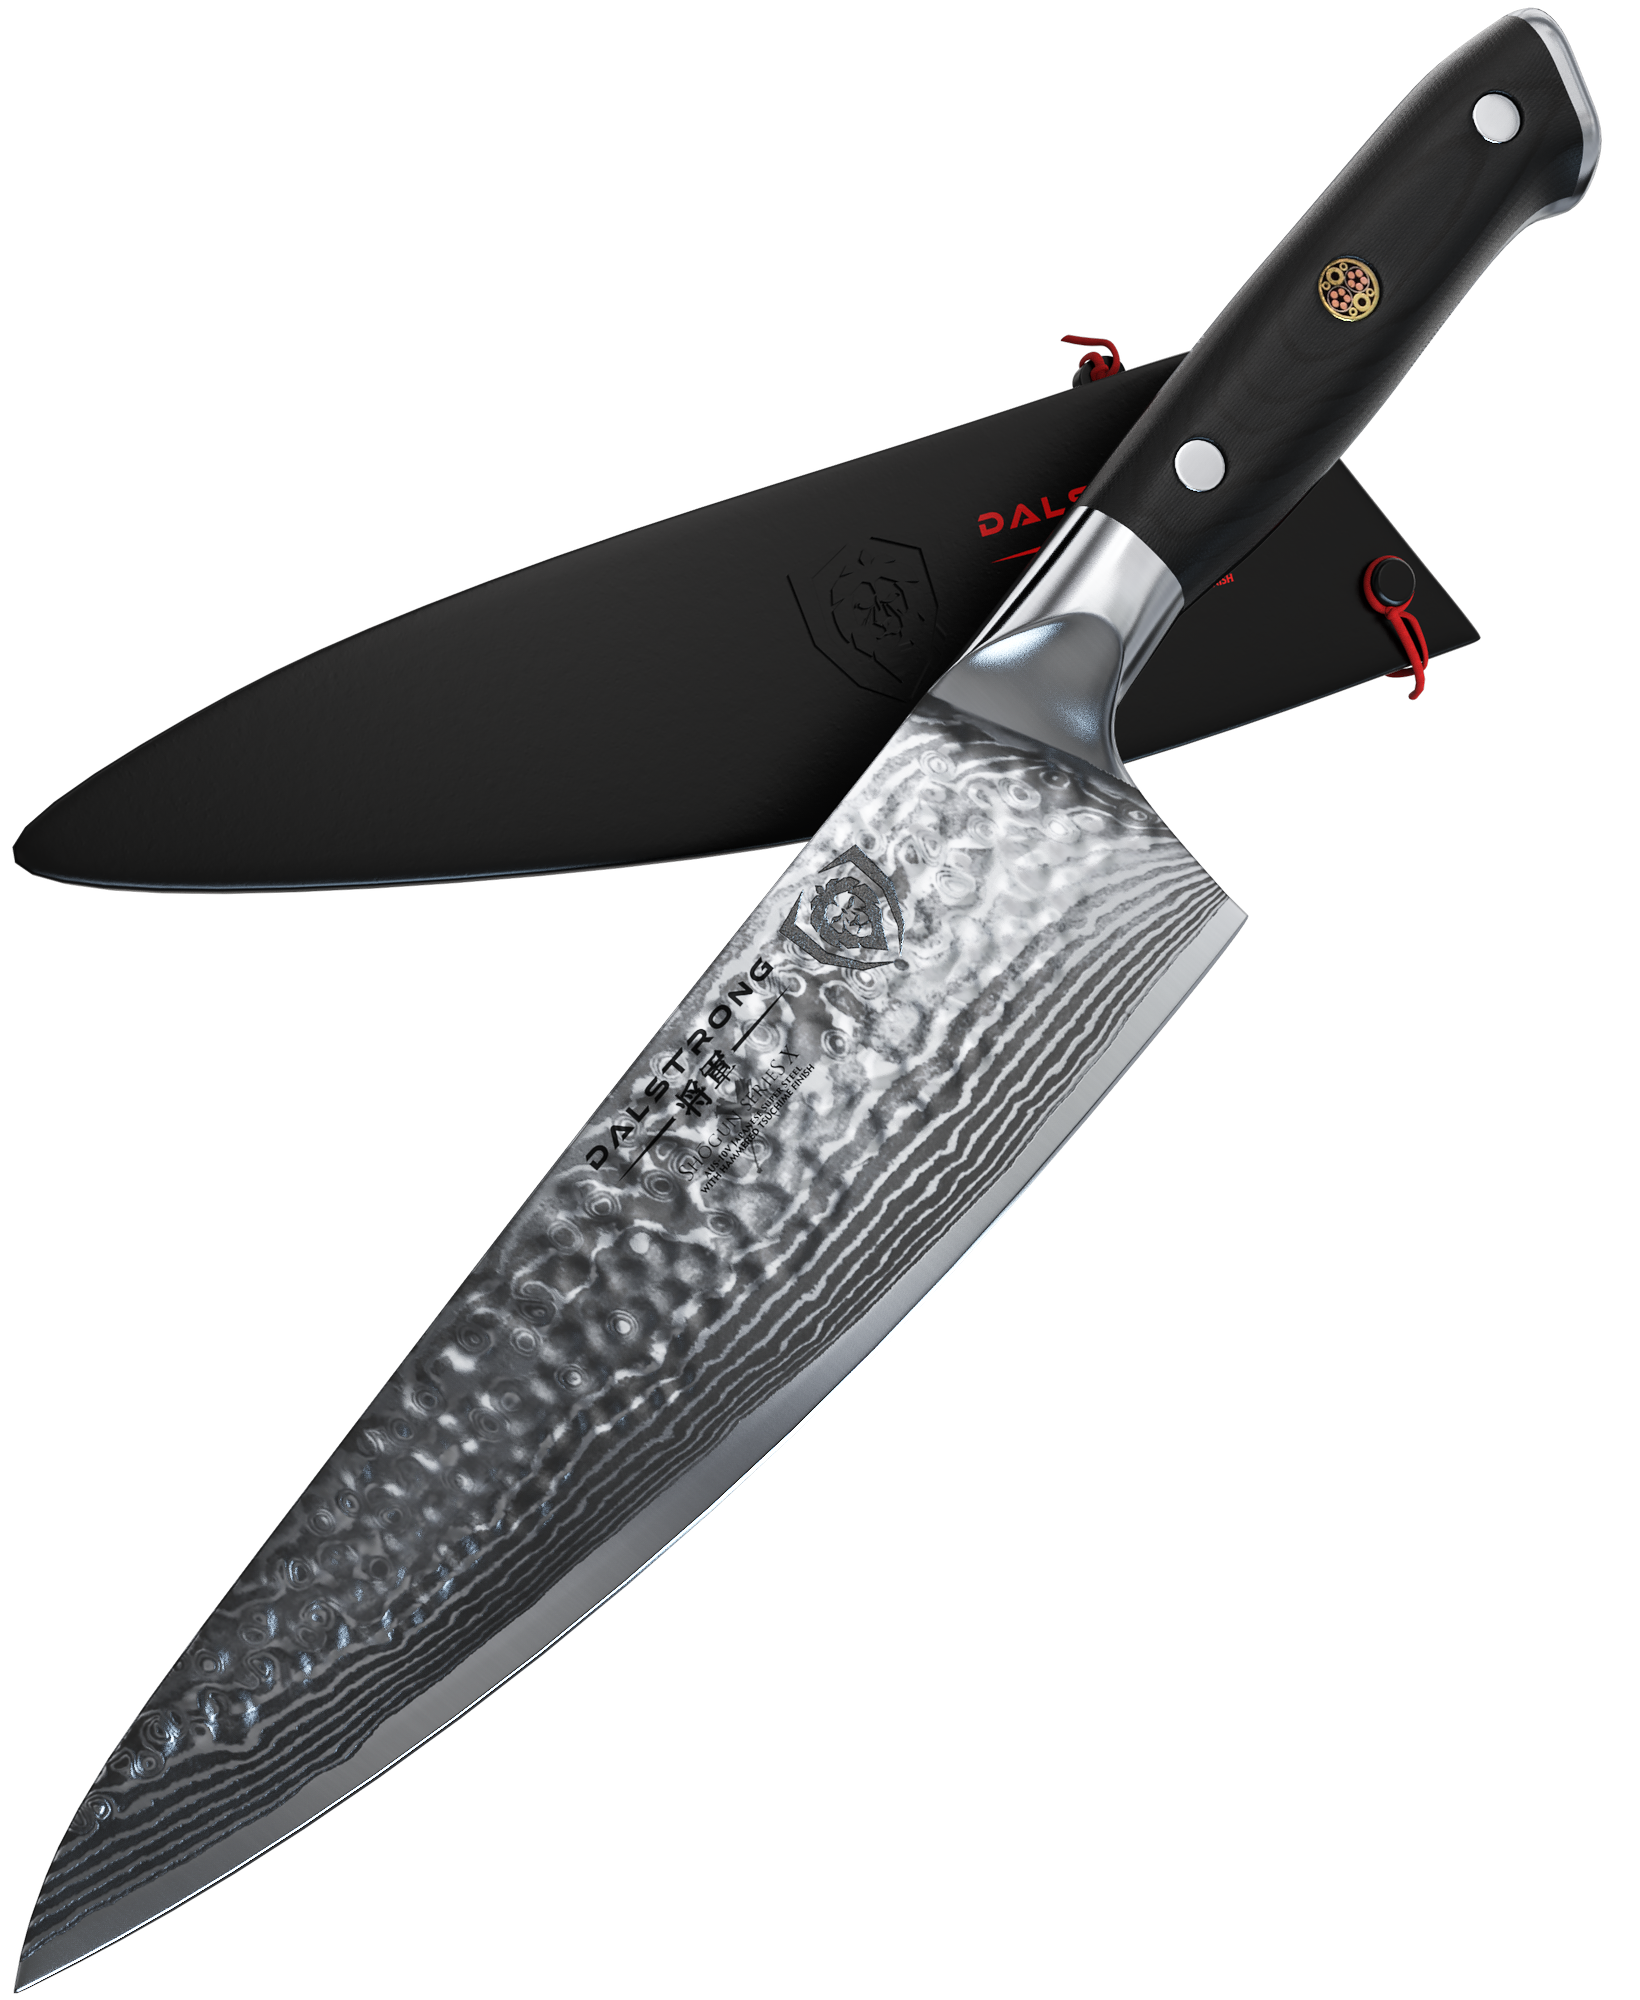 Dalstrong 7 in Chef's Knife Shogun Series X Black G10 Handle w